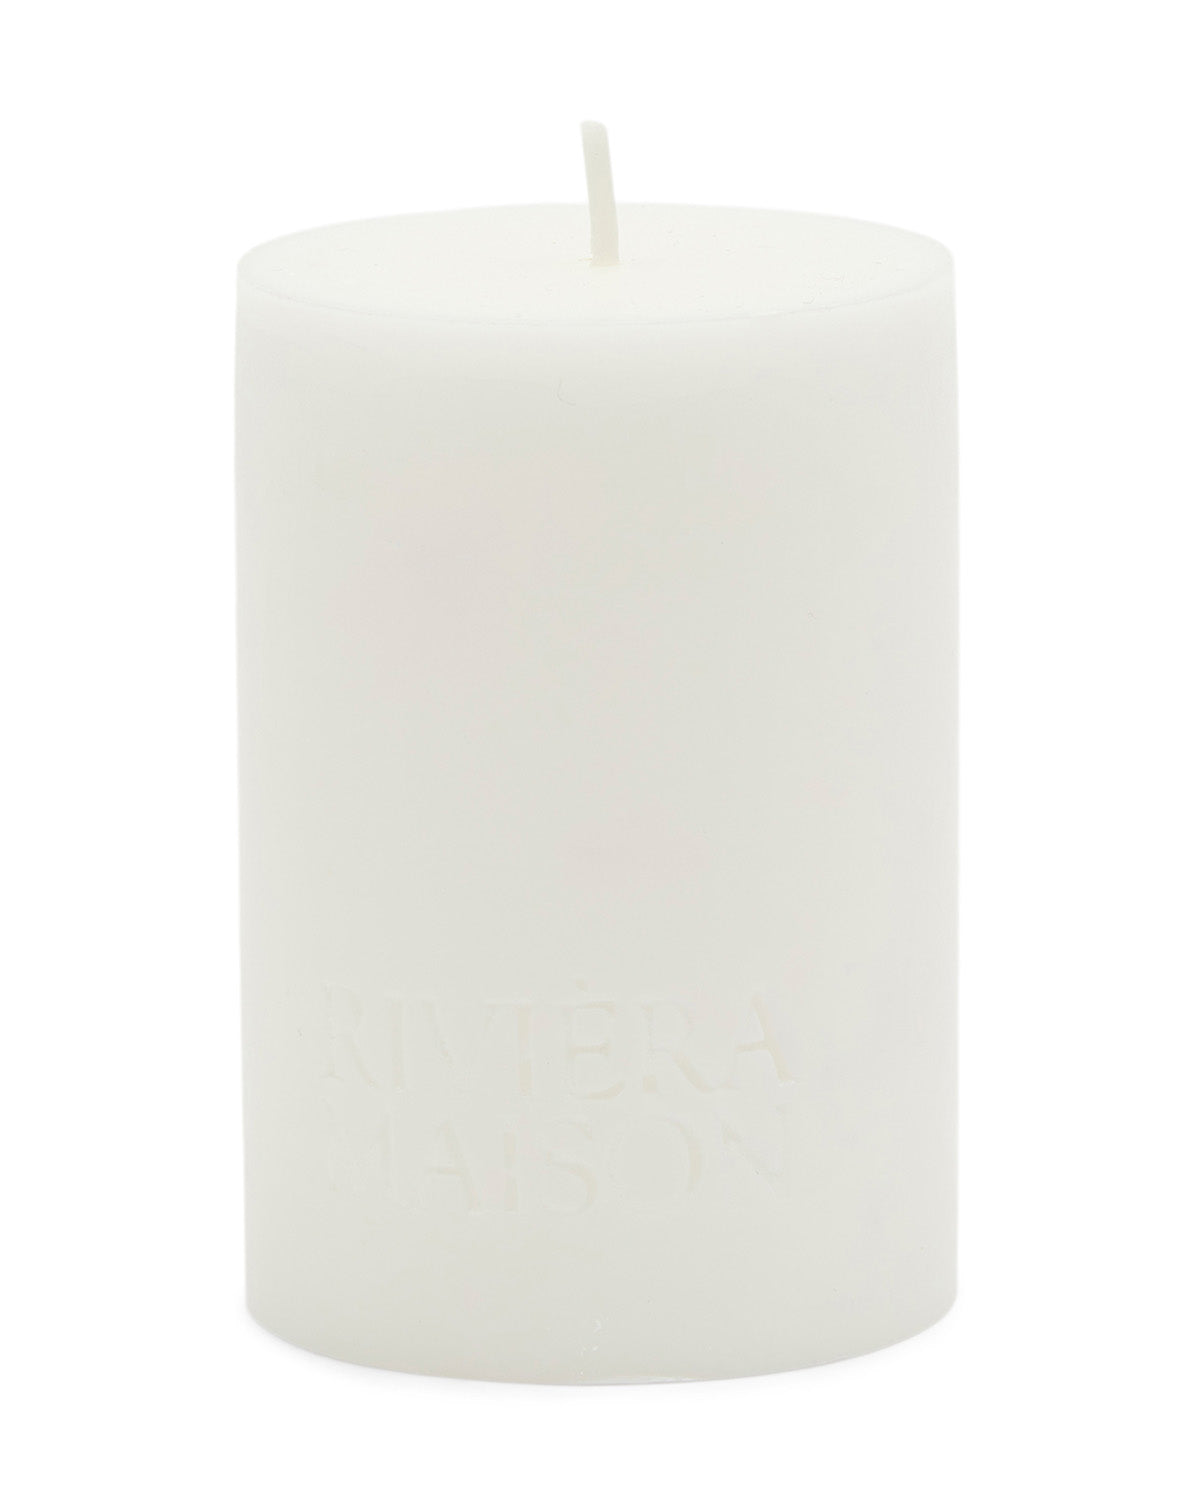 CANDLE OFF-WHITE by Riviera Maison